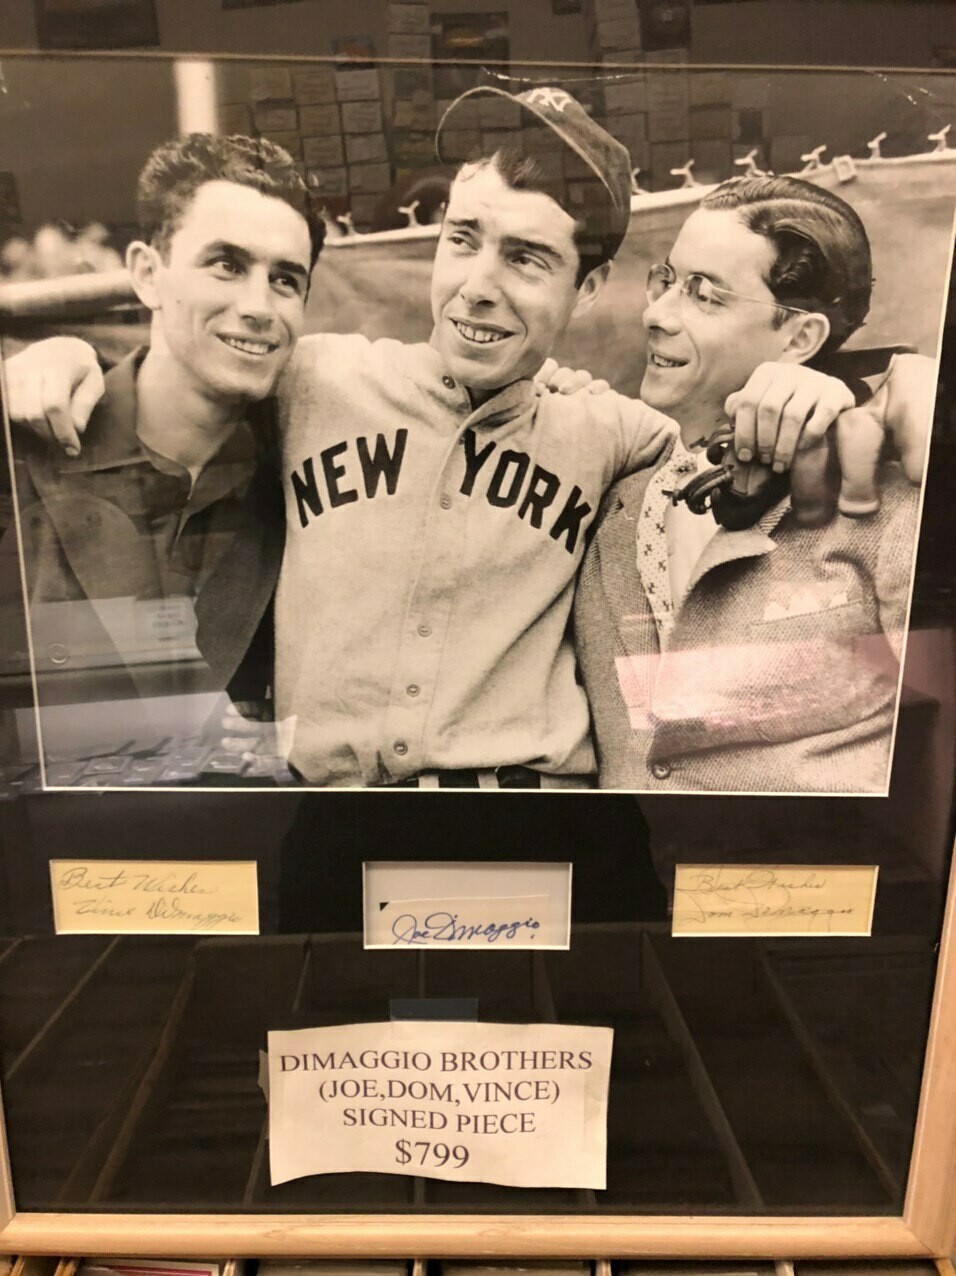 DiMaggio Brothers signed Piece, matted and framed: Joe, Dom,Vince PSA/DNA